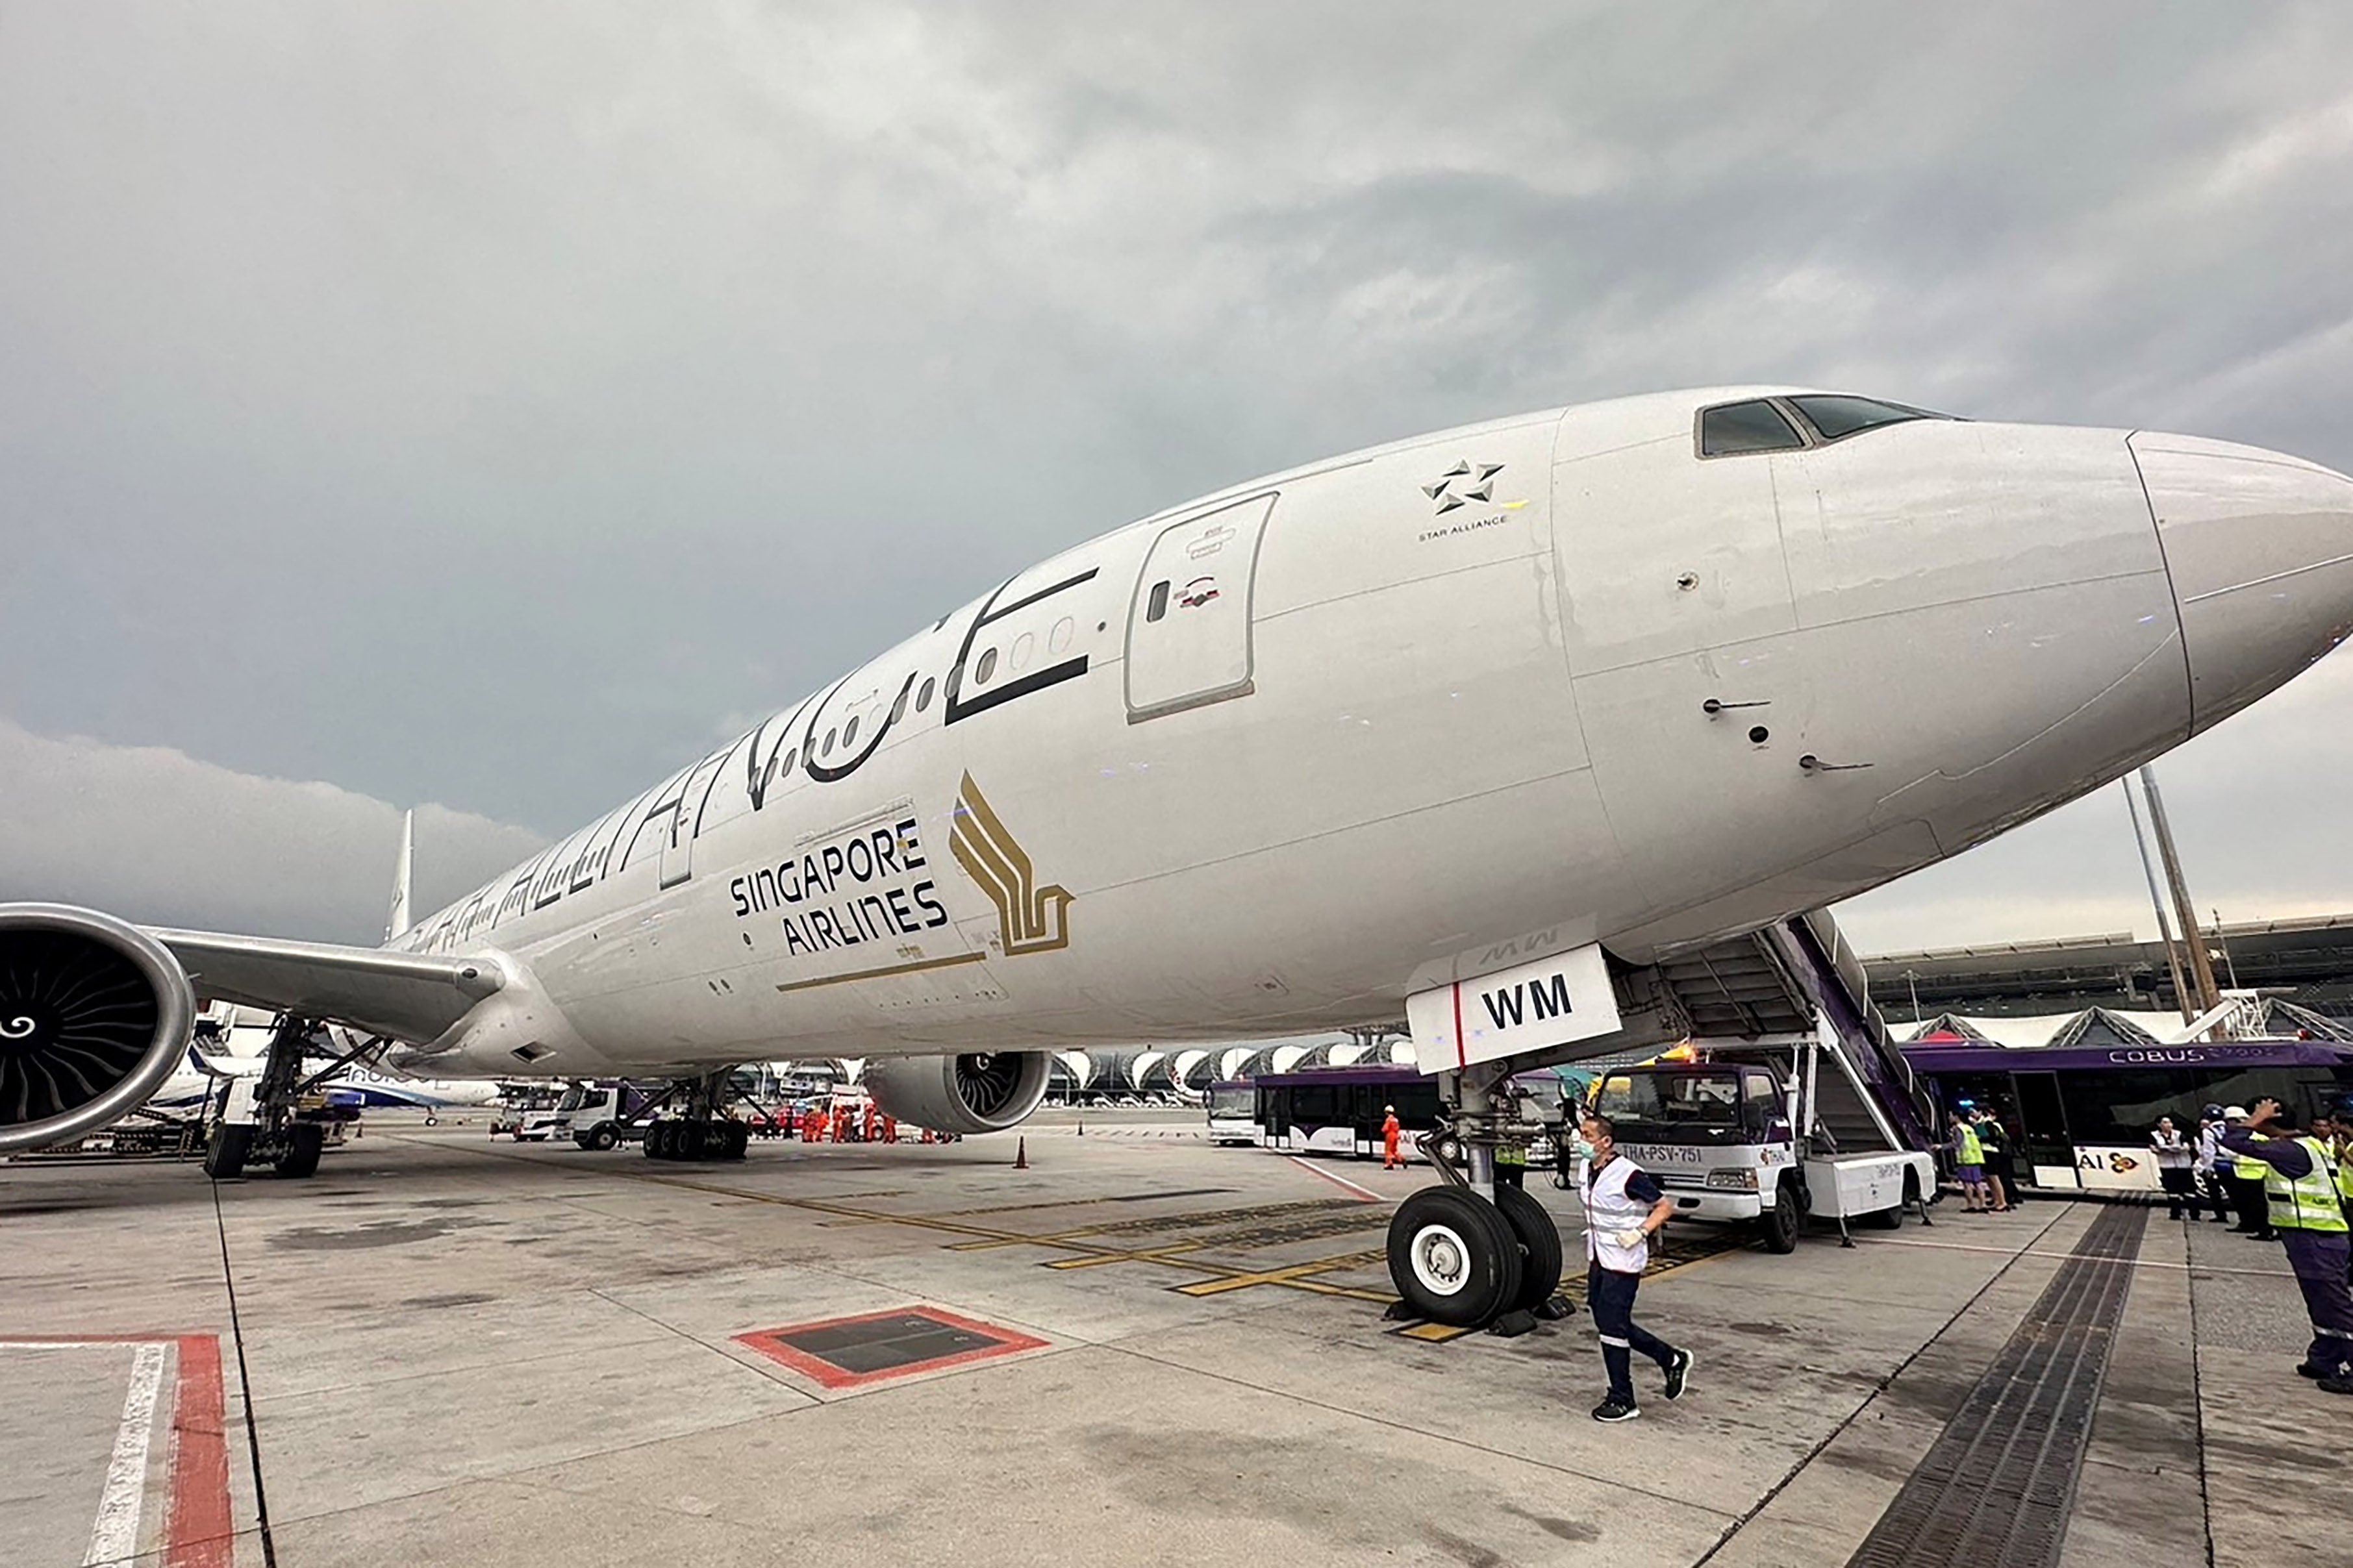 A Singapore Airline aircraft is seen on the tarmac after requesting an emergency landing at Bangkok’s Suvarnabhumi International Airport on May 21. Photo: Reuters